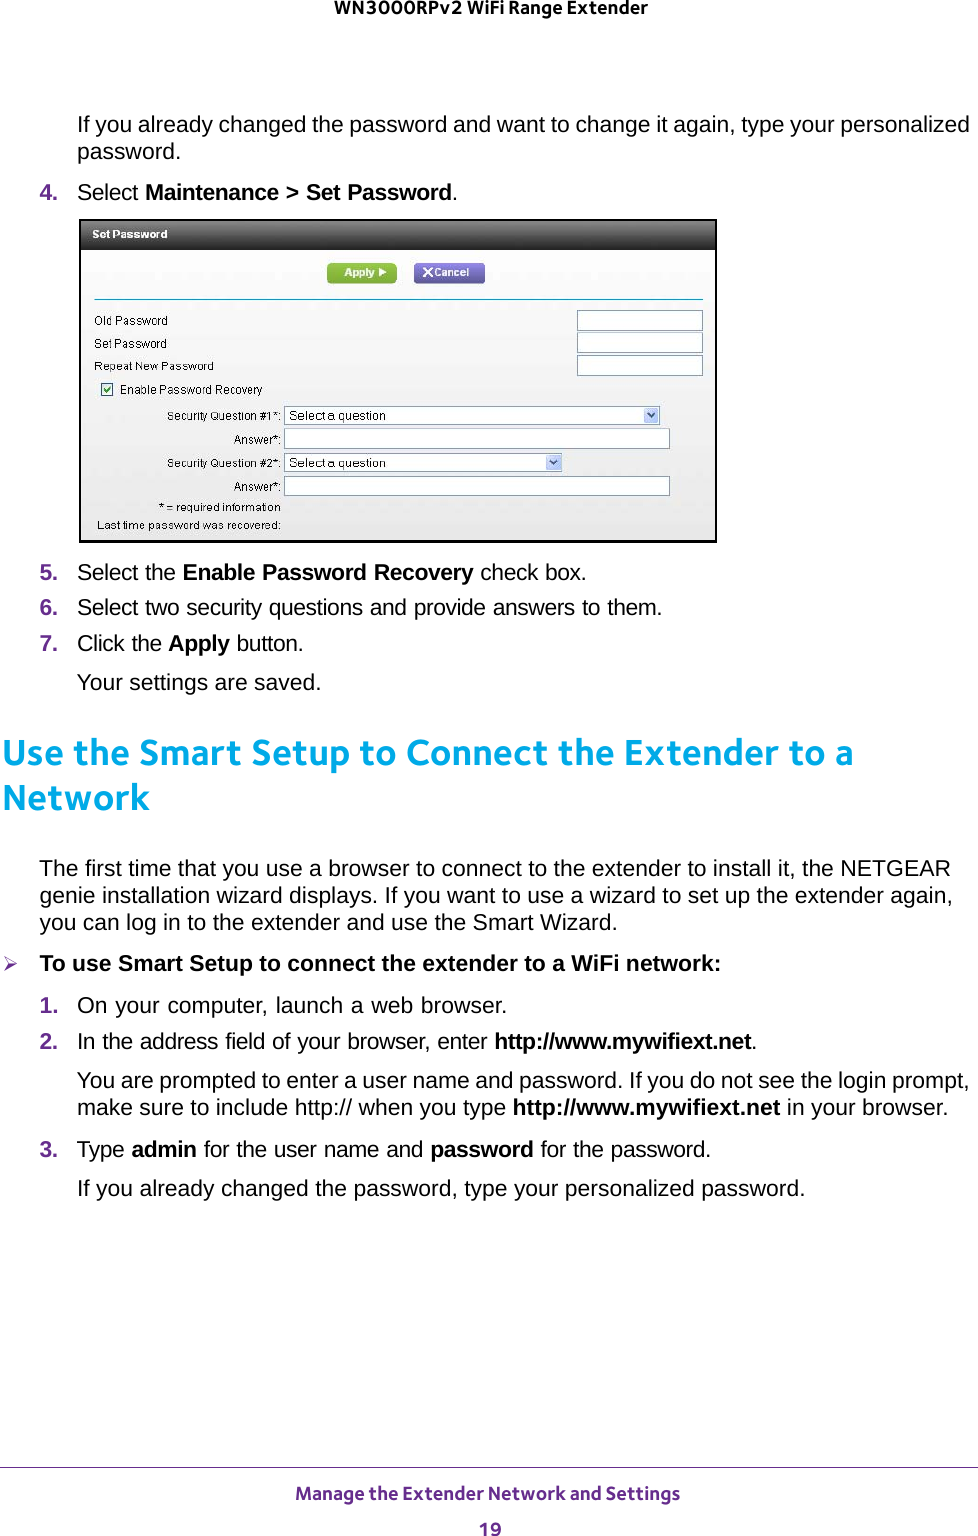 Manage the Extender Network and Settings 19 WN3000RPv2 WiFi Range ExtenderIf you already changed the password and want to change it again, type your personalized password.4.  Select Maintenance &gt; Set Password.5.  Select the Enable Password Recovery check box.6.  Select two security questions and provide answers to them.7.  Click the Apply button.Your settings are saved.Use the Smart Setup to Connect the Extender to a NetworkThe first time that you use a browser to connect to the extender to install it, the NETGEAR genie installation wizard displays. If you want to use a wizard to set up the extender again, you can log in to the extender and use the Smart Wizard.To use Smart Setup to connect the extender to a WiFi network:1.  On your computer, launch a web browser.2.  In the address field of your browser, enter http://www.mywifiext.net.You are prompted to enter a user name and password. If you do not see the login prompt, make sure to include http:// when you type http://www.mywifiext.net in your browser.3.  Type admin for the user name and password for the password.If you already changed the password, type your personalized password.